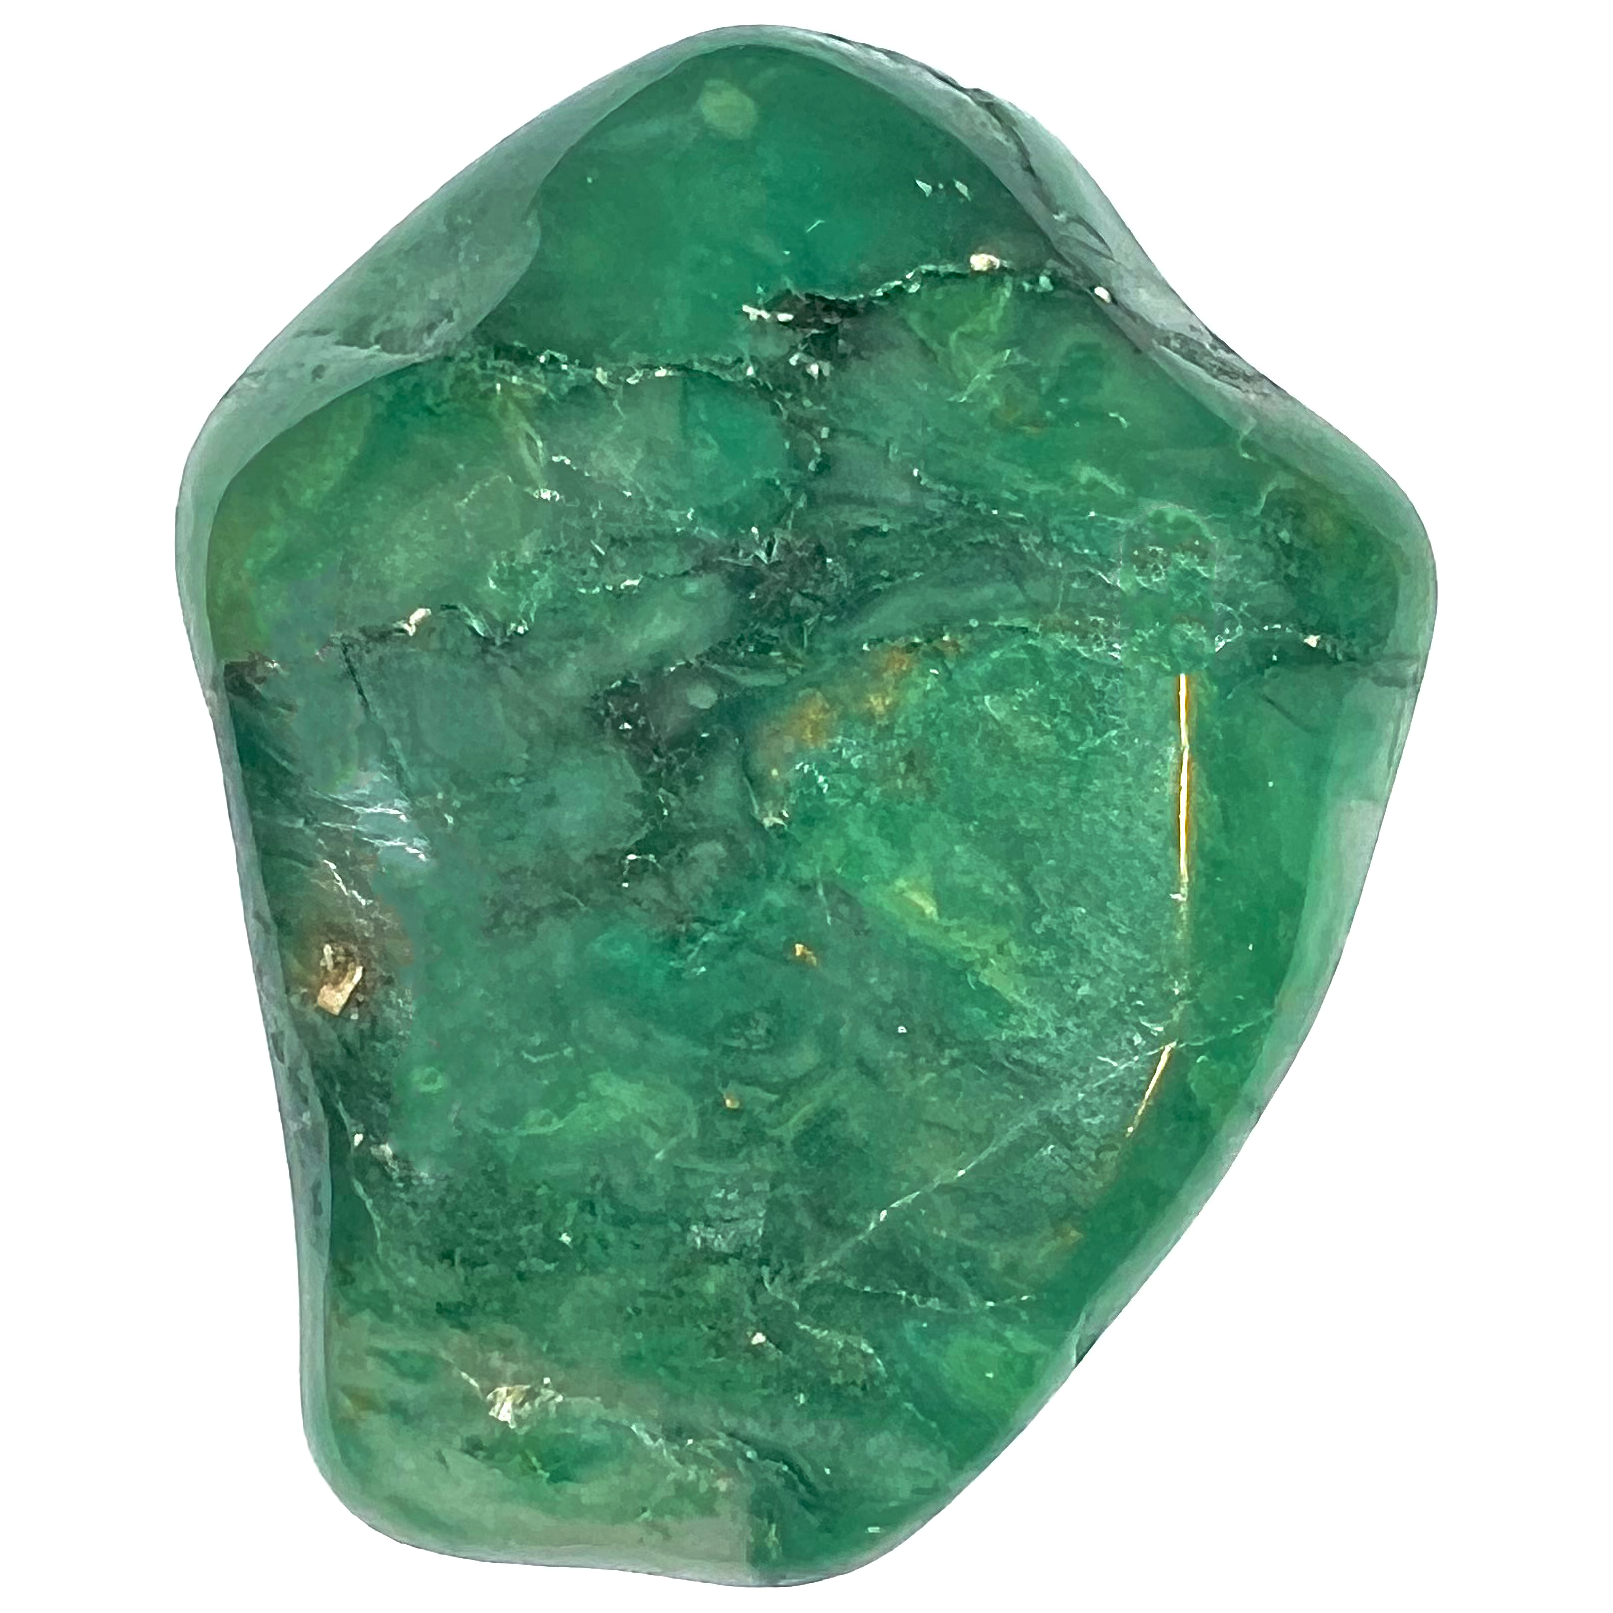 A green streaked tumbled stone.  The stone is dark, light, and medium green in darkness throughout.